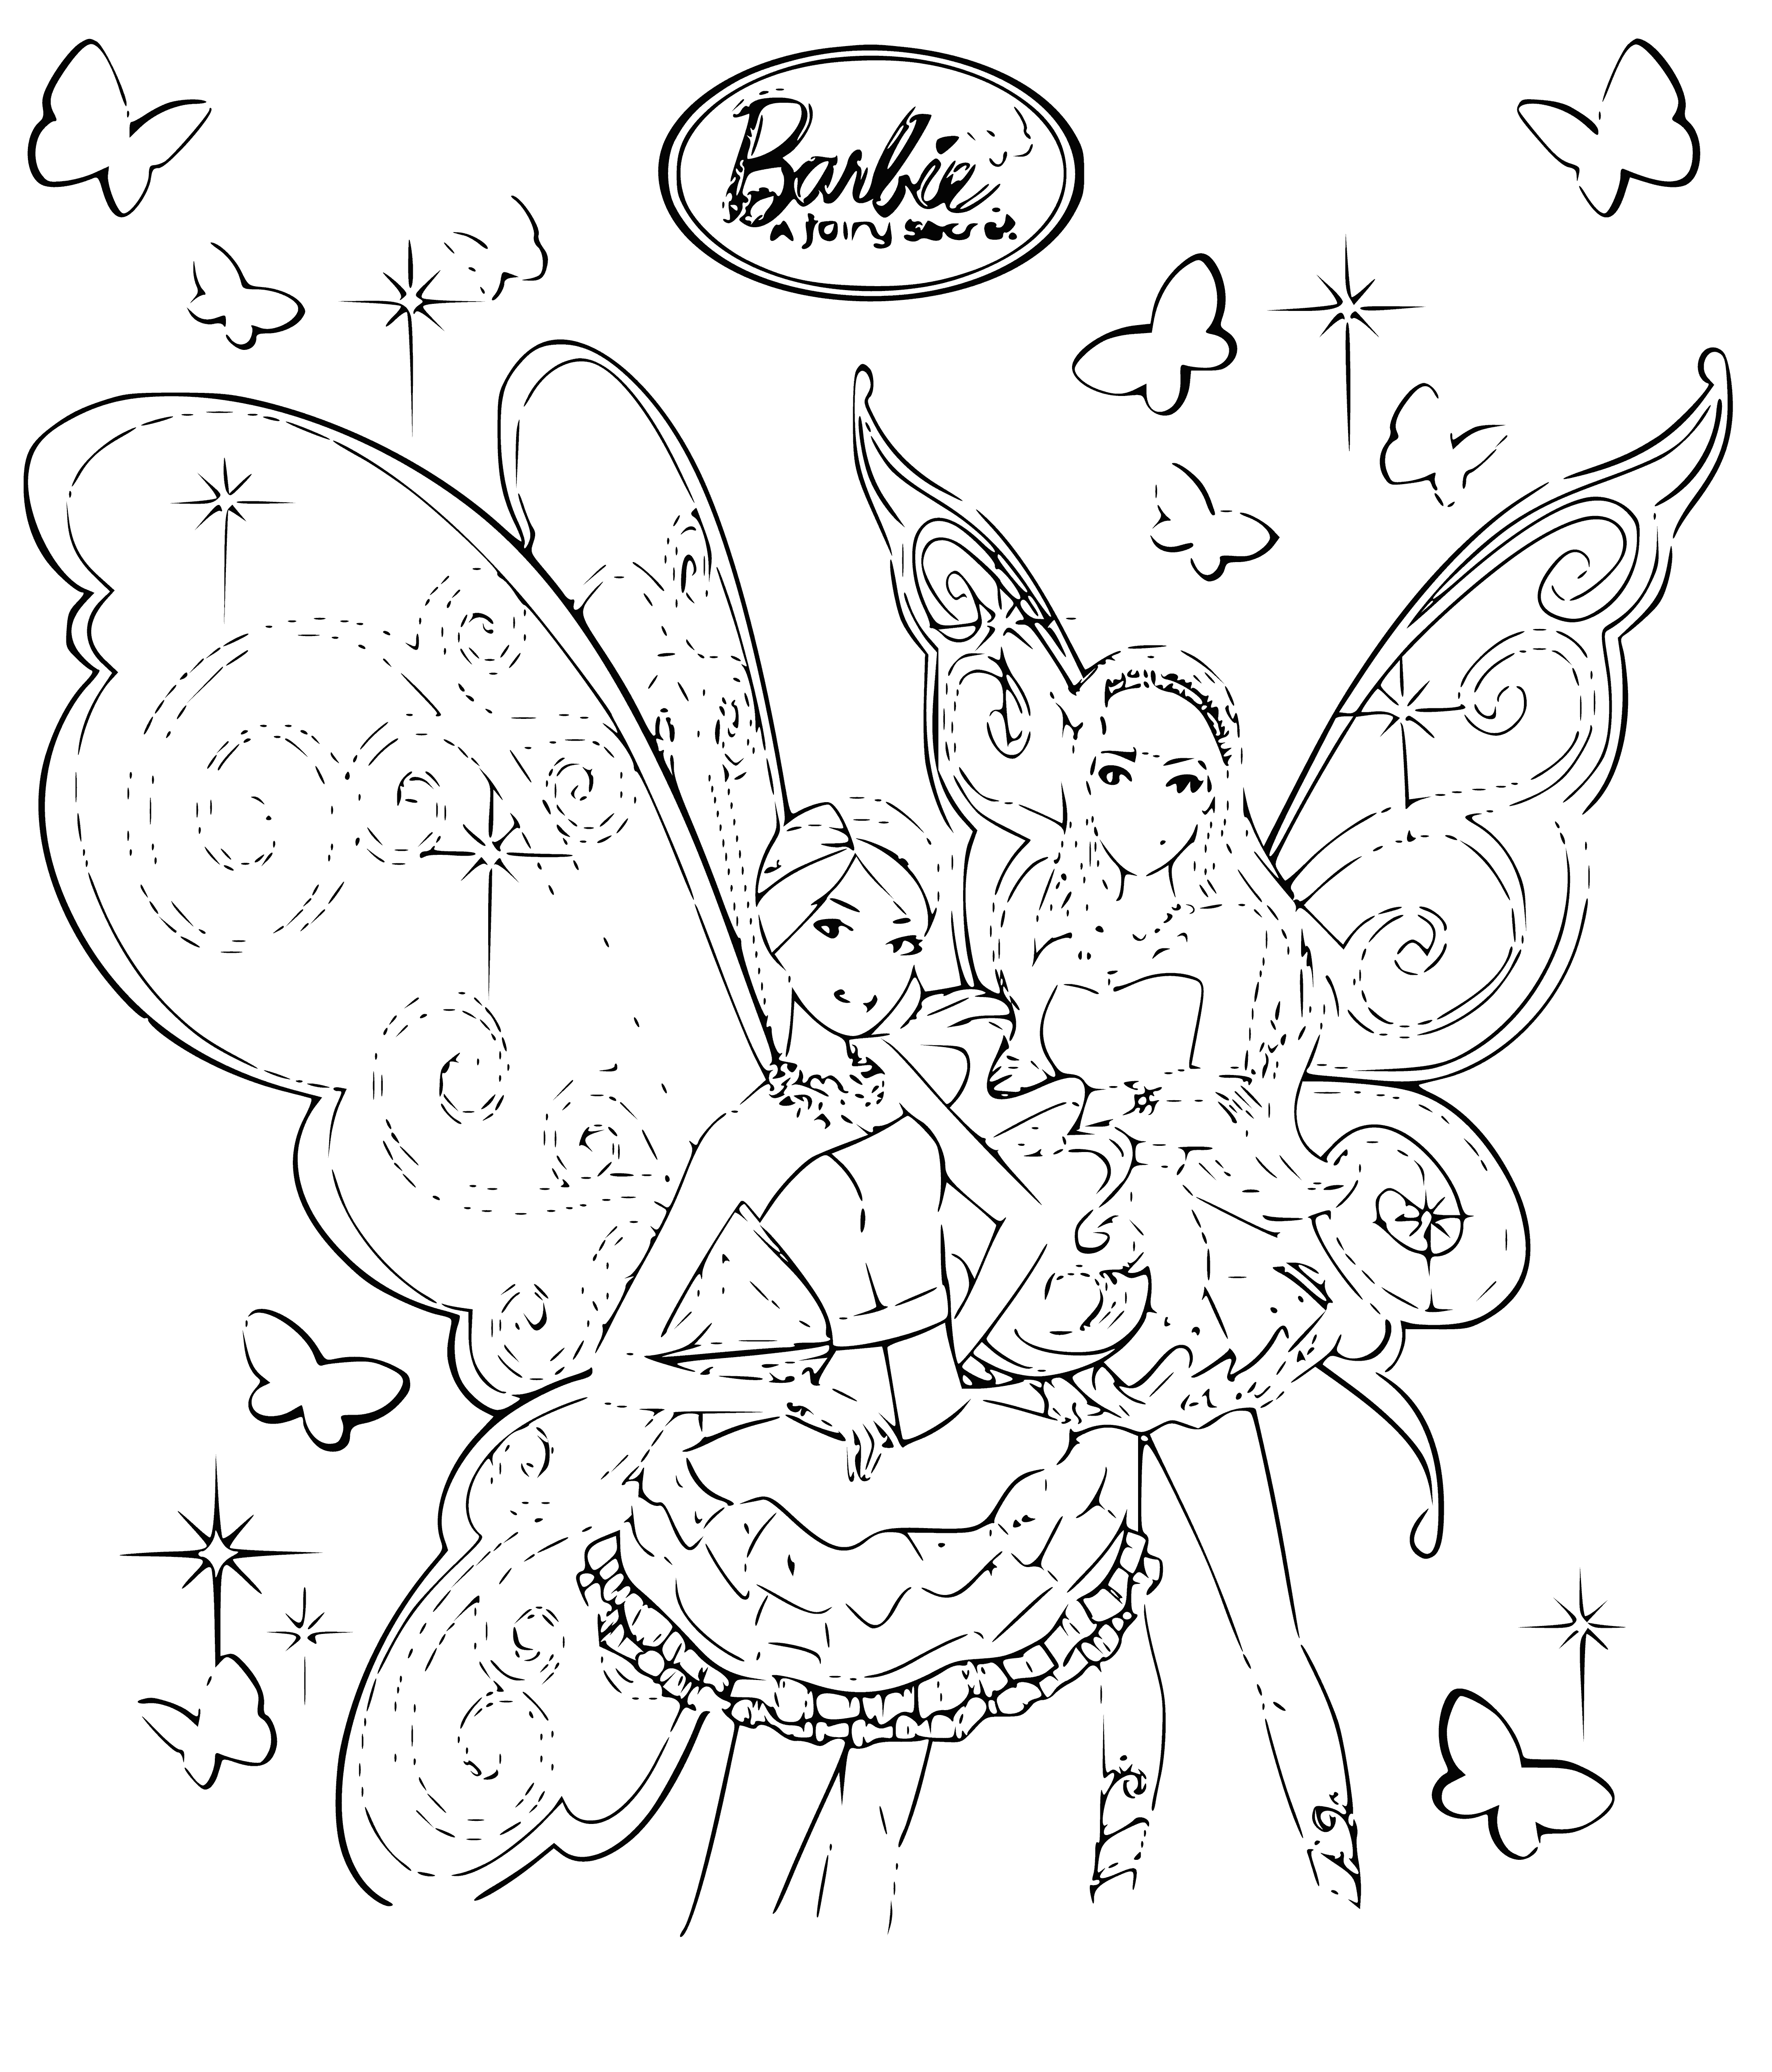 Barbie fairies coloring page